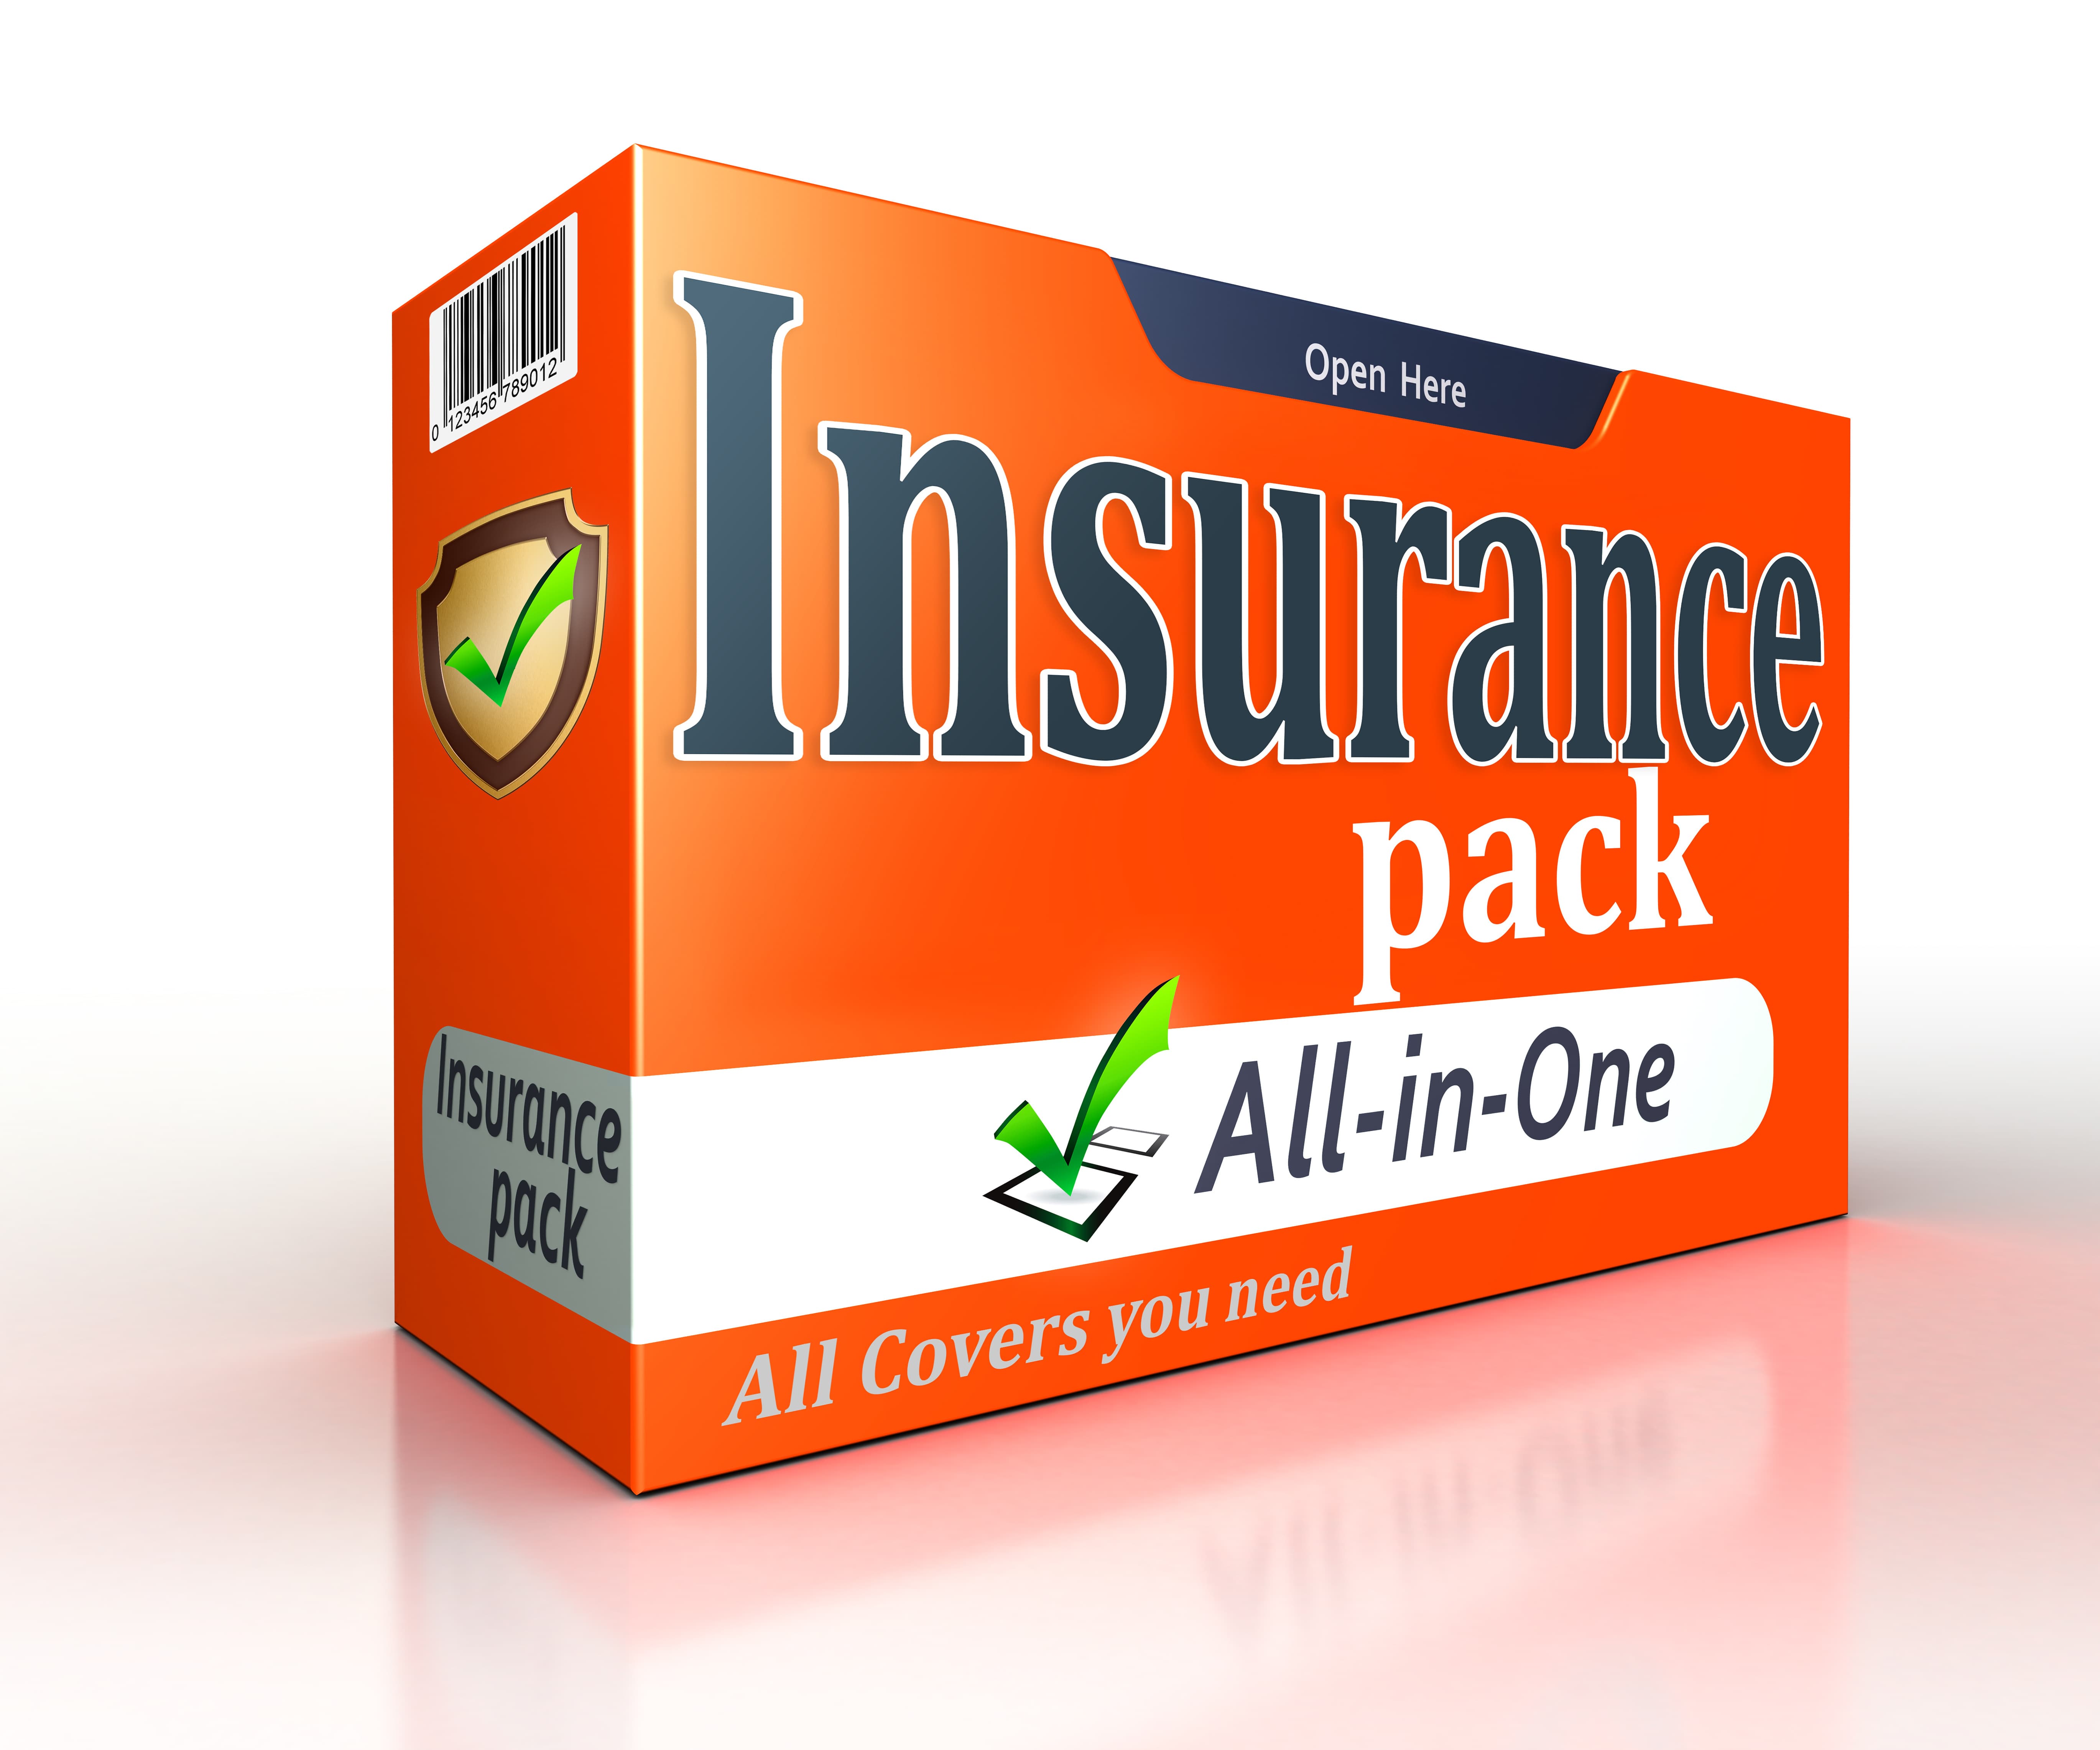 insurance-orange-pack-concept-on-white-background-clipping-path-included